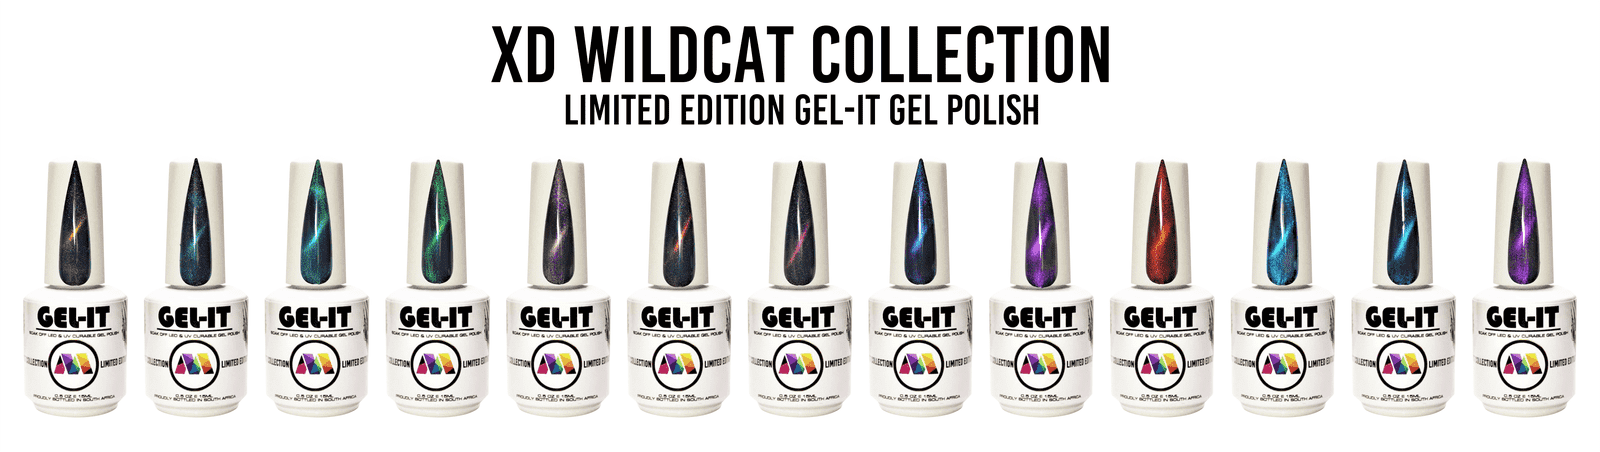 GPWC11 - Panther (XD Wildcat Collection - Limited Edition) - Maskscara